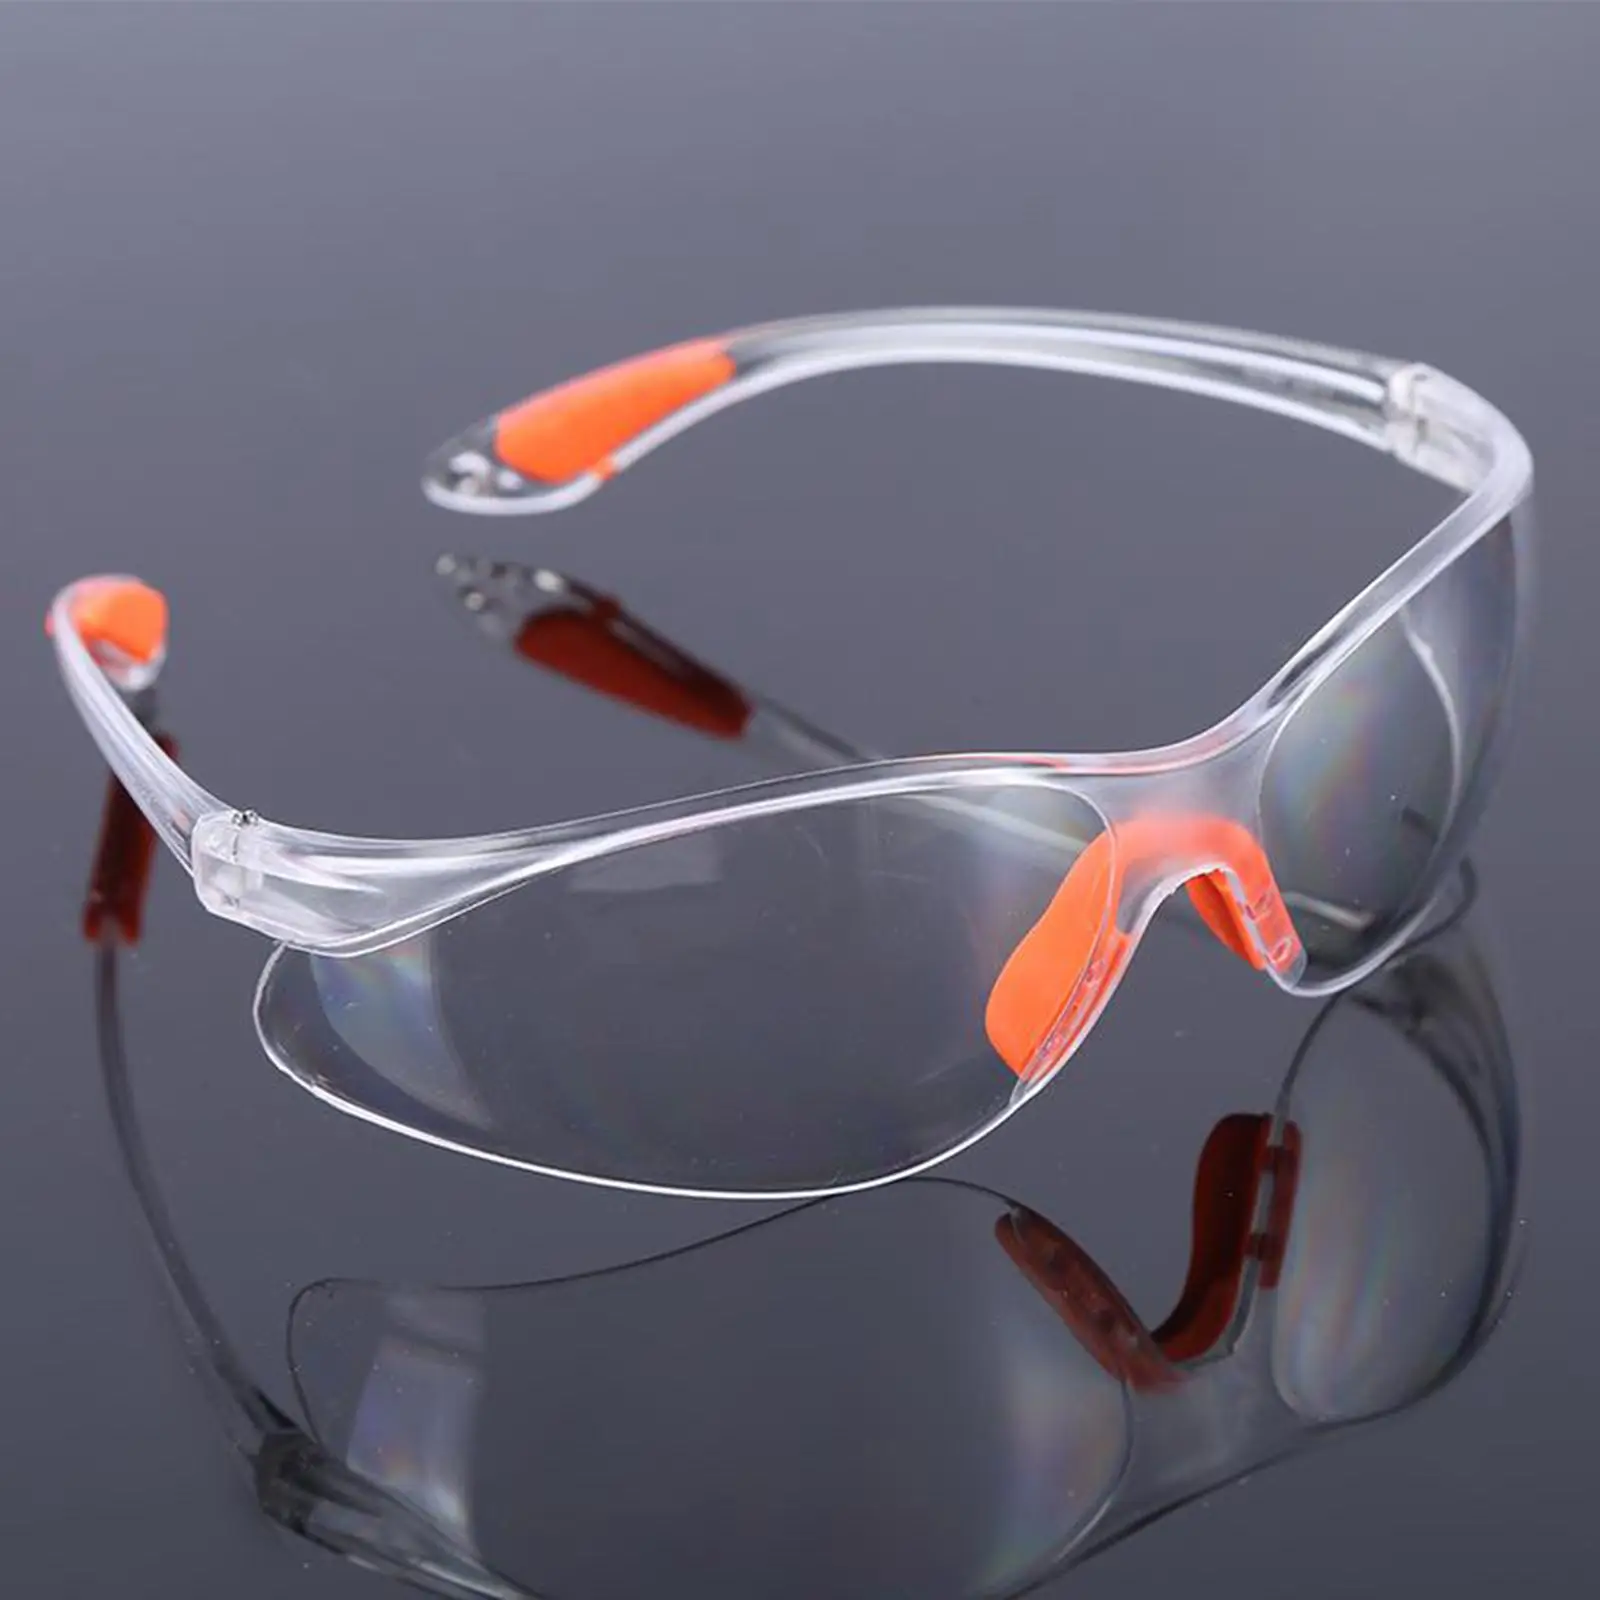 Protective Safety Glasses,Crystal Clear & Anti-Fog Design,High Impact Resistance,Perfect Eye Protection for Lab, Chemical